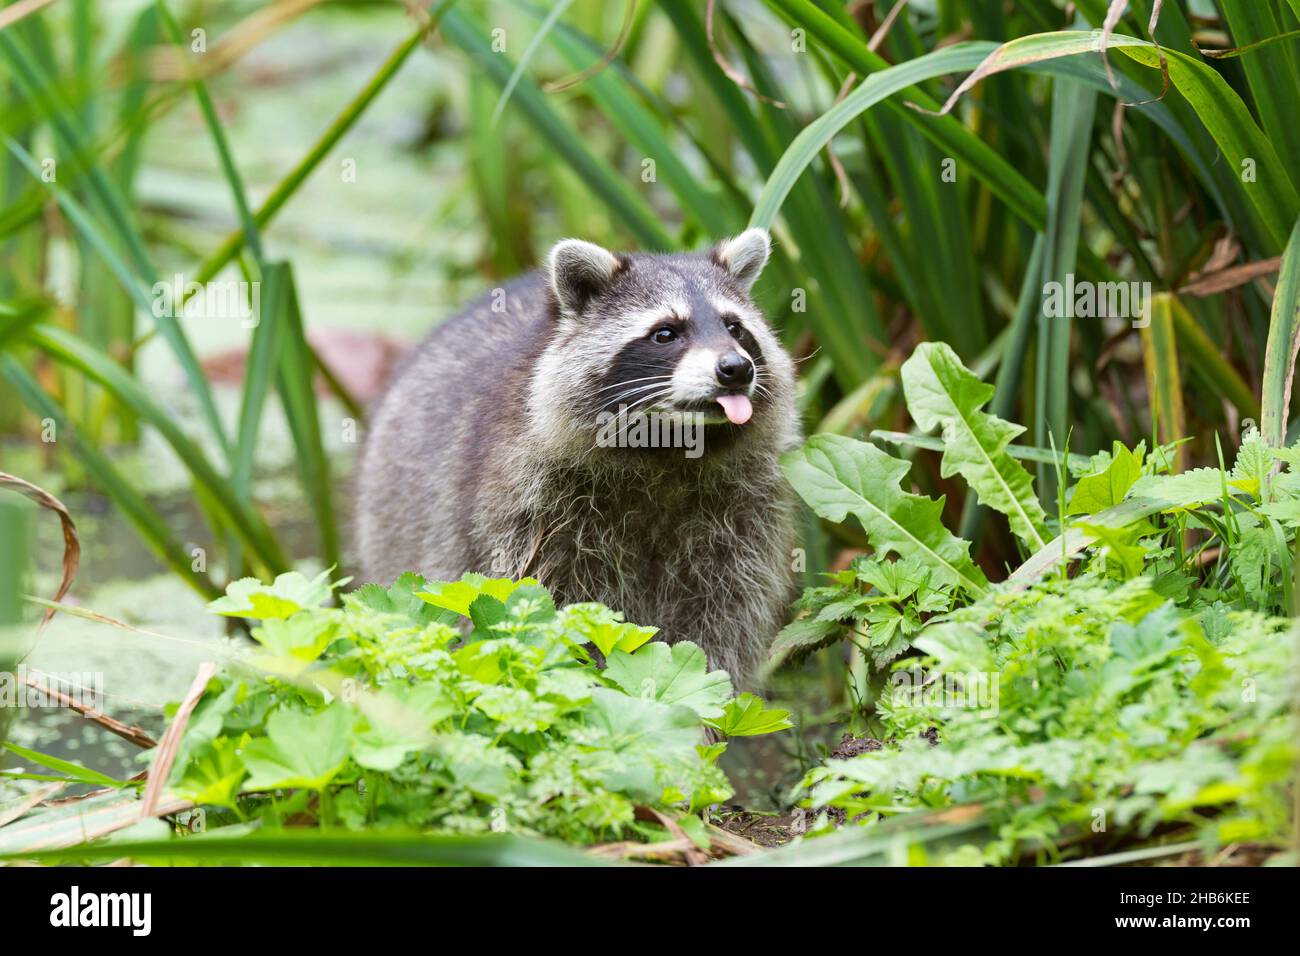 common raccoon (Procyon lotor), pokes out its tongue, Germany Stock Photo